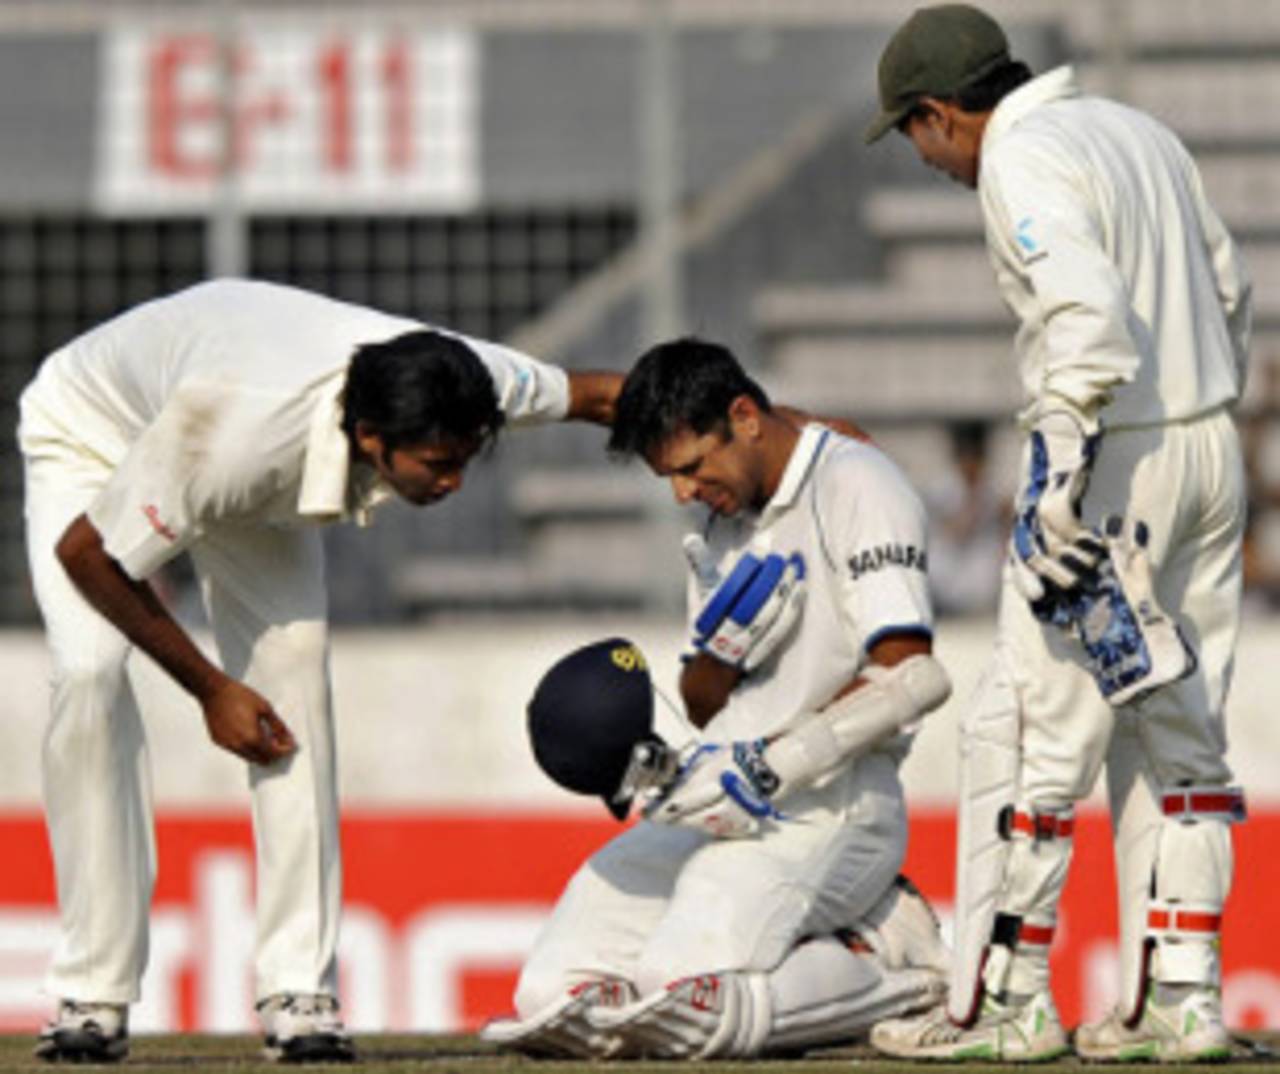 Rahul Dravid has been advised not to play cricket or any contact sports for about 2-3 weeks&nbsp;&nbsp;&bull;&nbsp;&nbsp;Associated Press